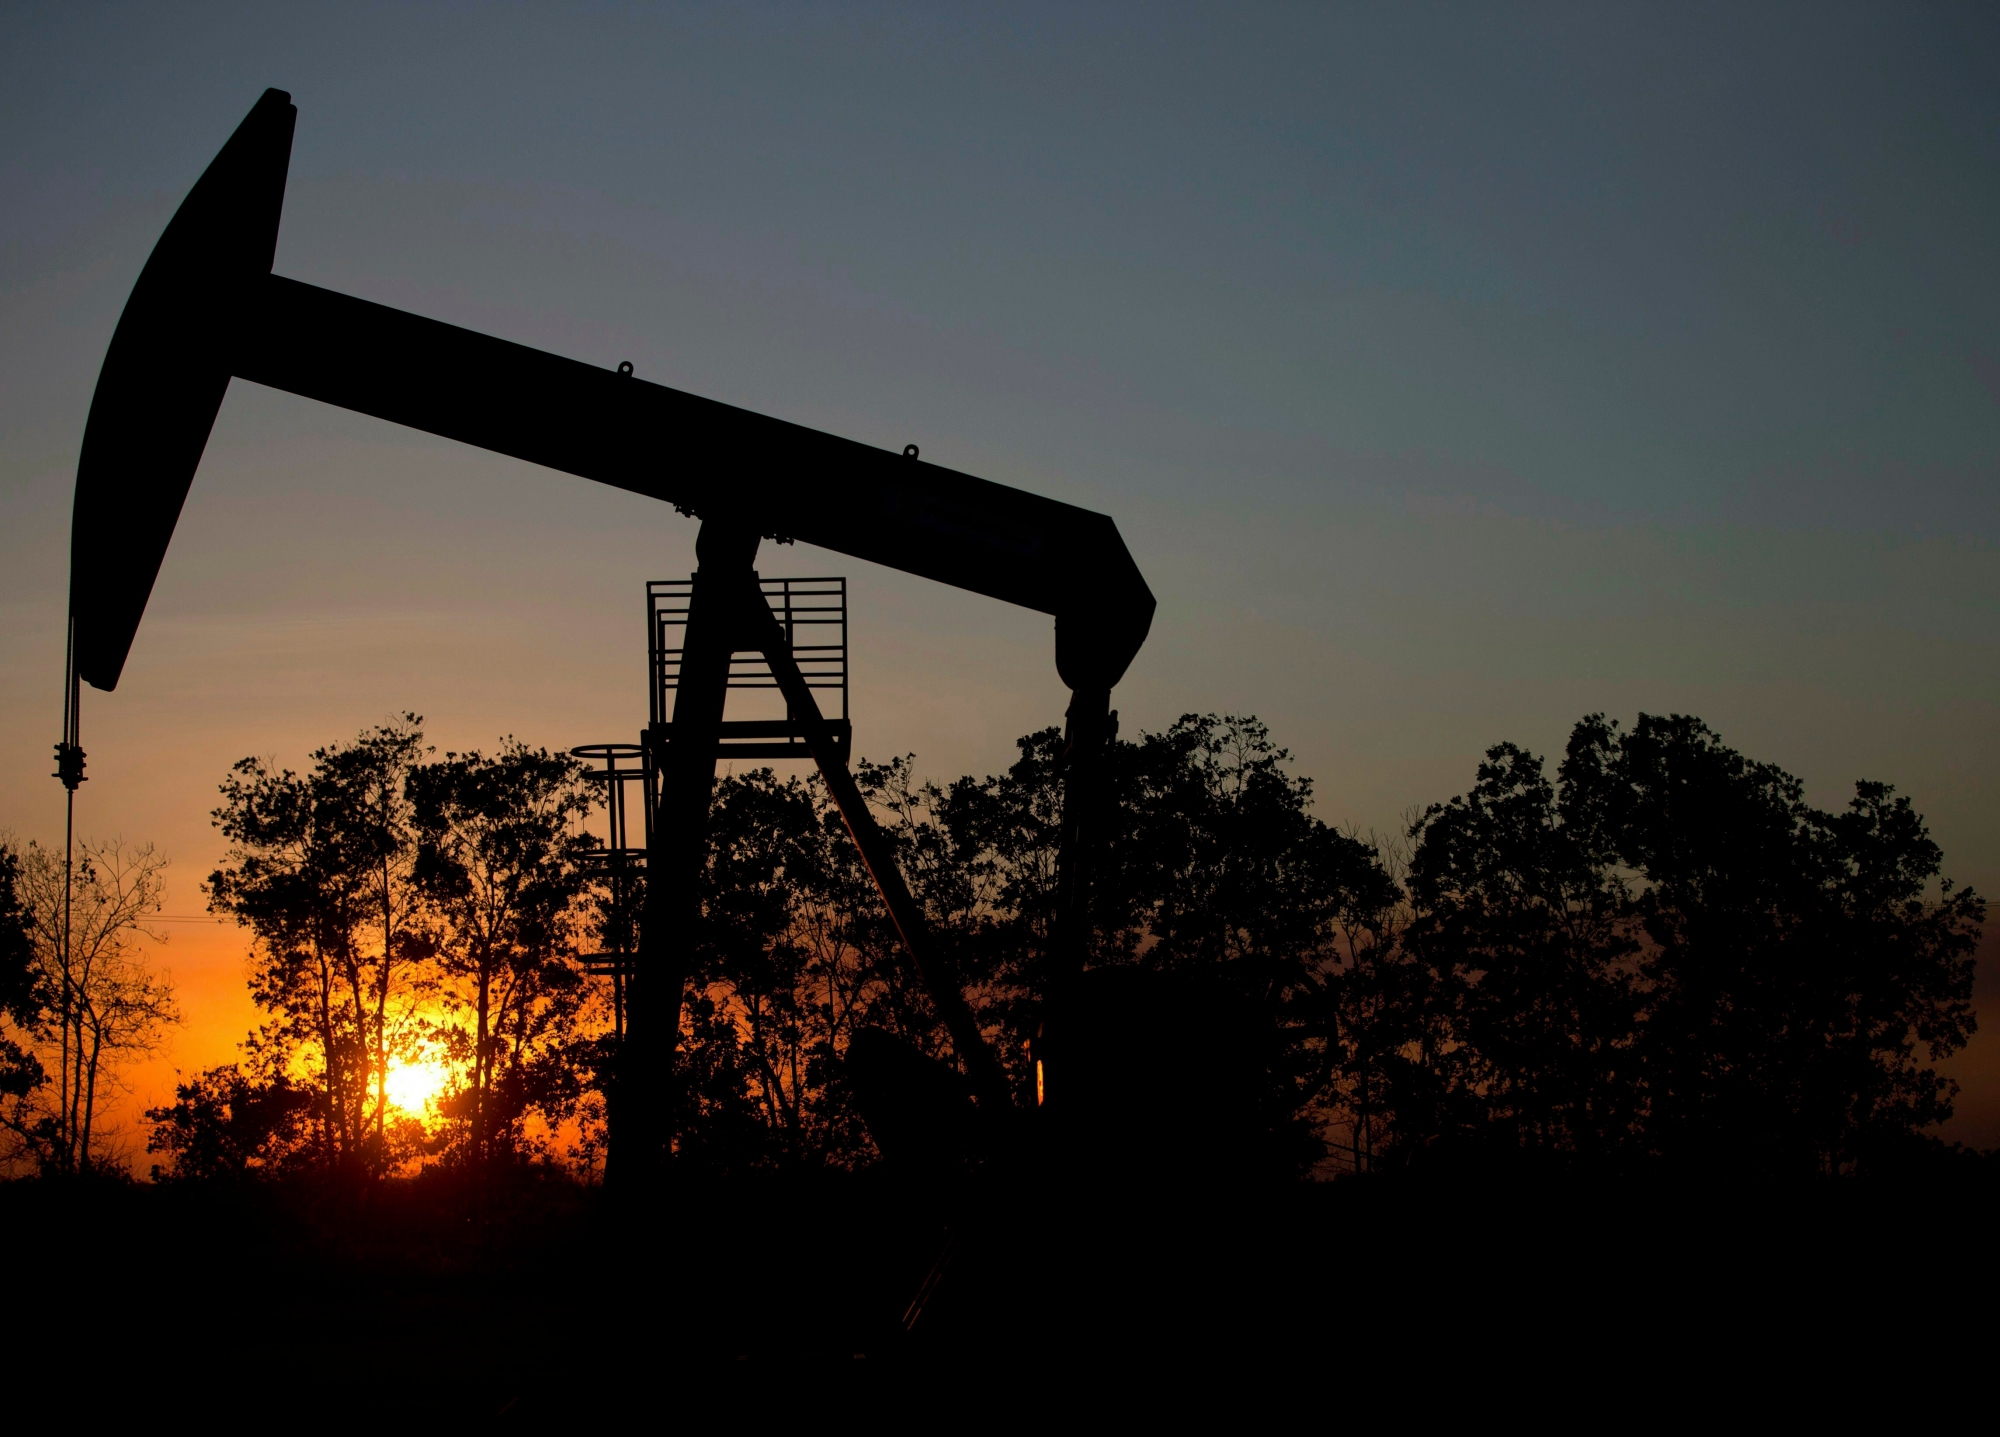 FILE - In this Feb. 19, 2015 file photo, the sun sets behind an oil well in a field near El Tigre, a town within Venezuela's Hugo Chavez oil belt, formally known as the Orinoco Belt. Venezuelan oil exports to the U.S. have declined steadily over the years, falling particularly sharply over the past decade as its production plummeted amid its long economic and political crisis. (AP Photo/Fernando Llano, File) AP Explains Venezuela Oil